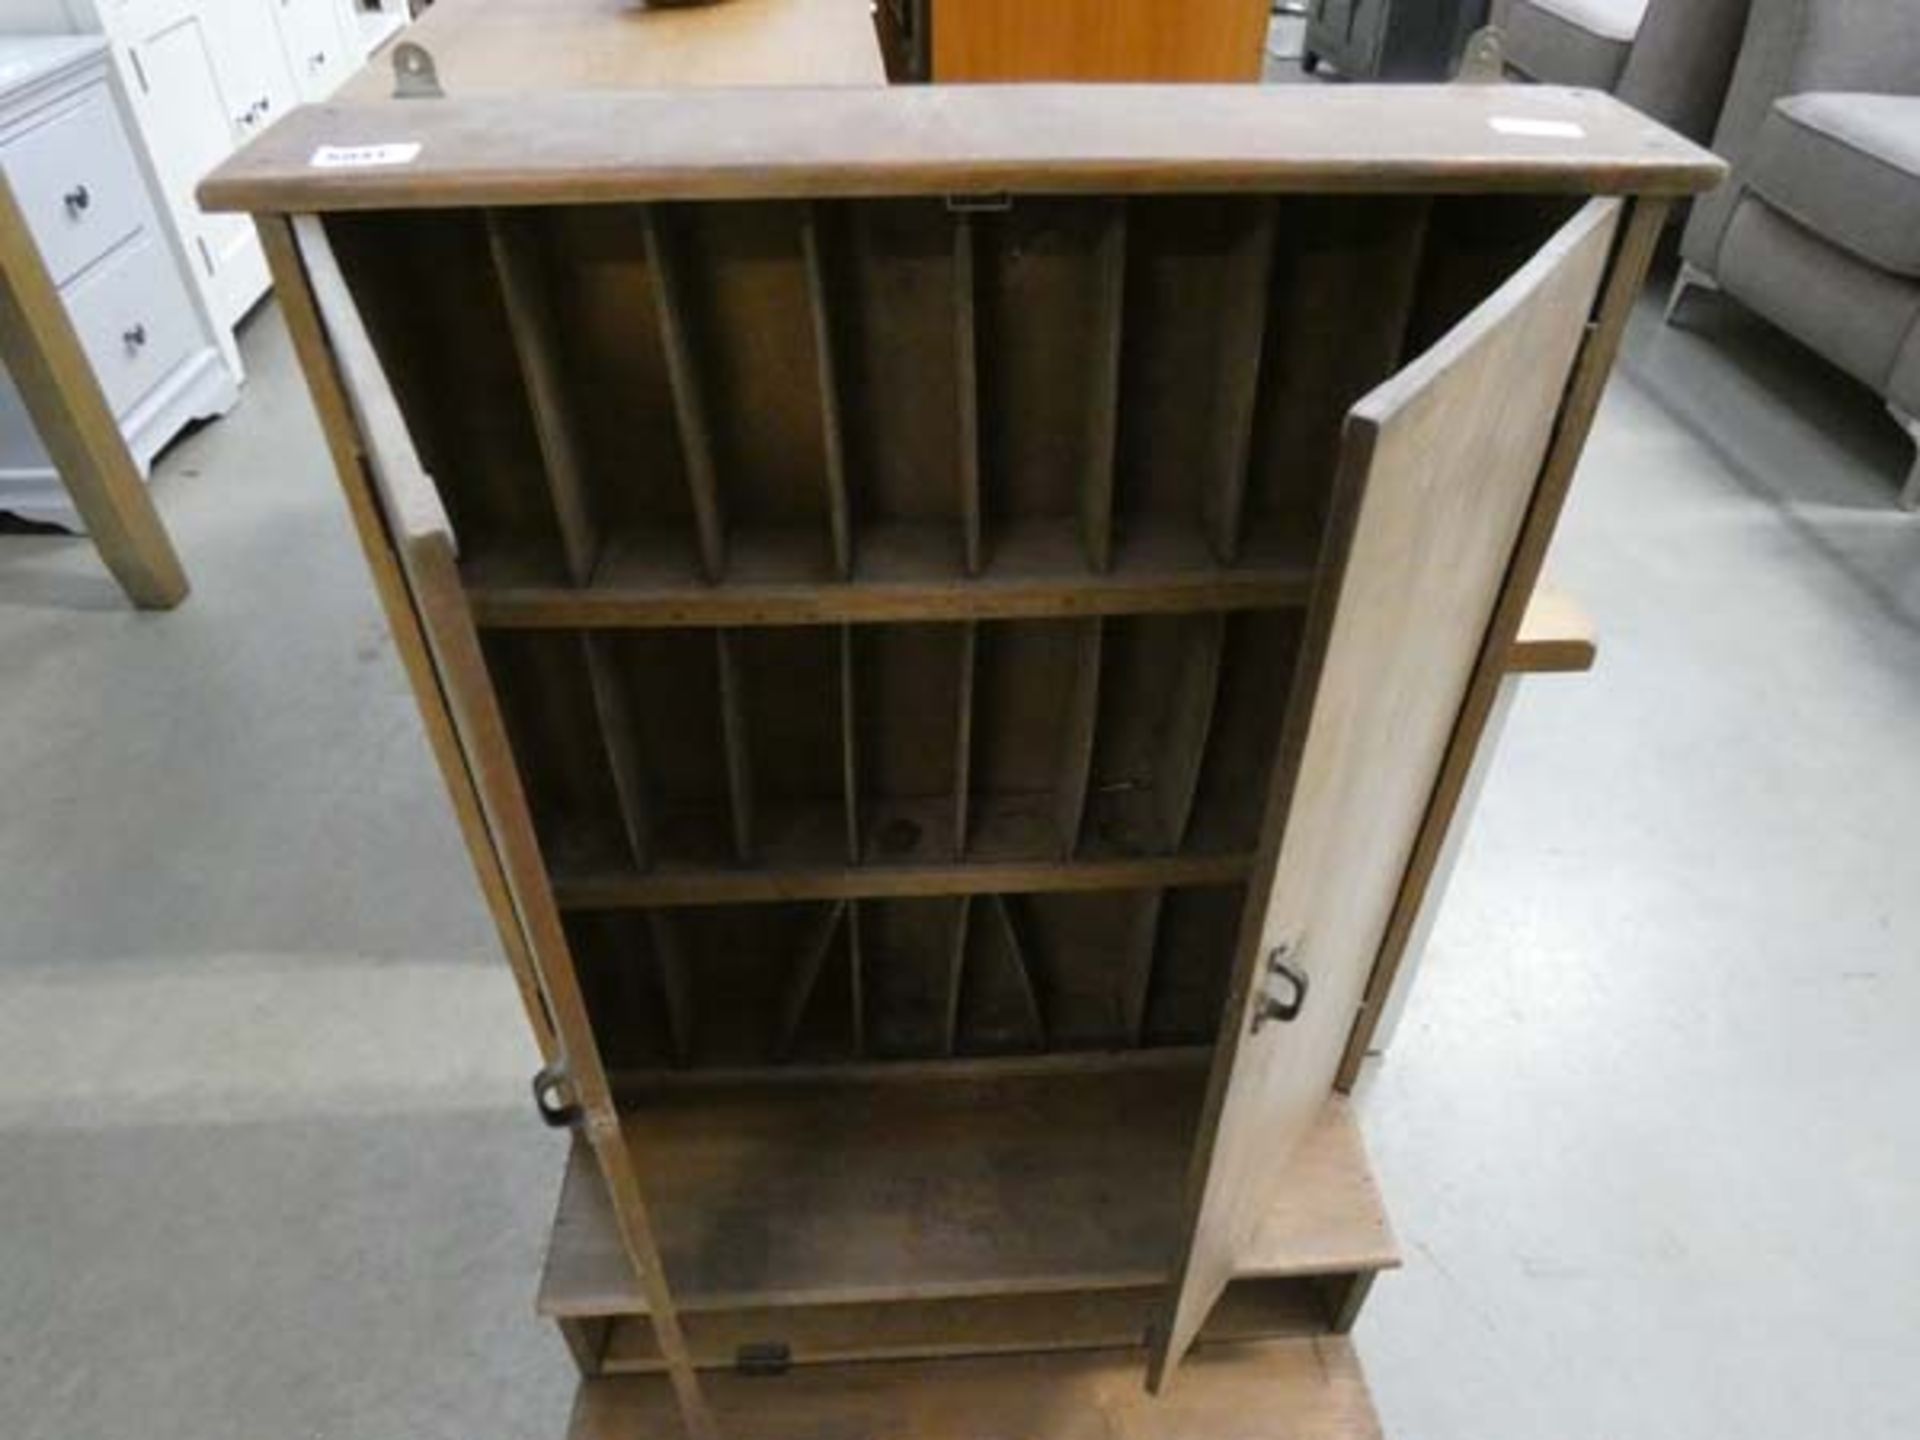 5318 - Hanging cabinet with pigeon holes and storage space under - Image 2 of 2